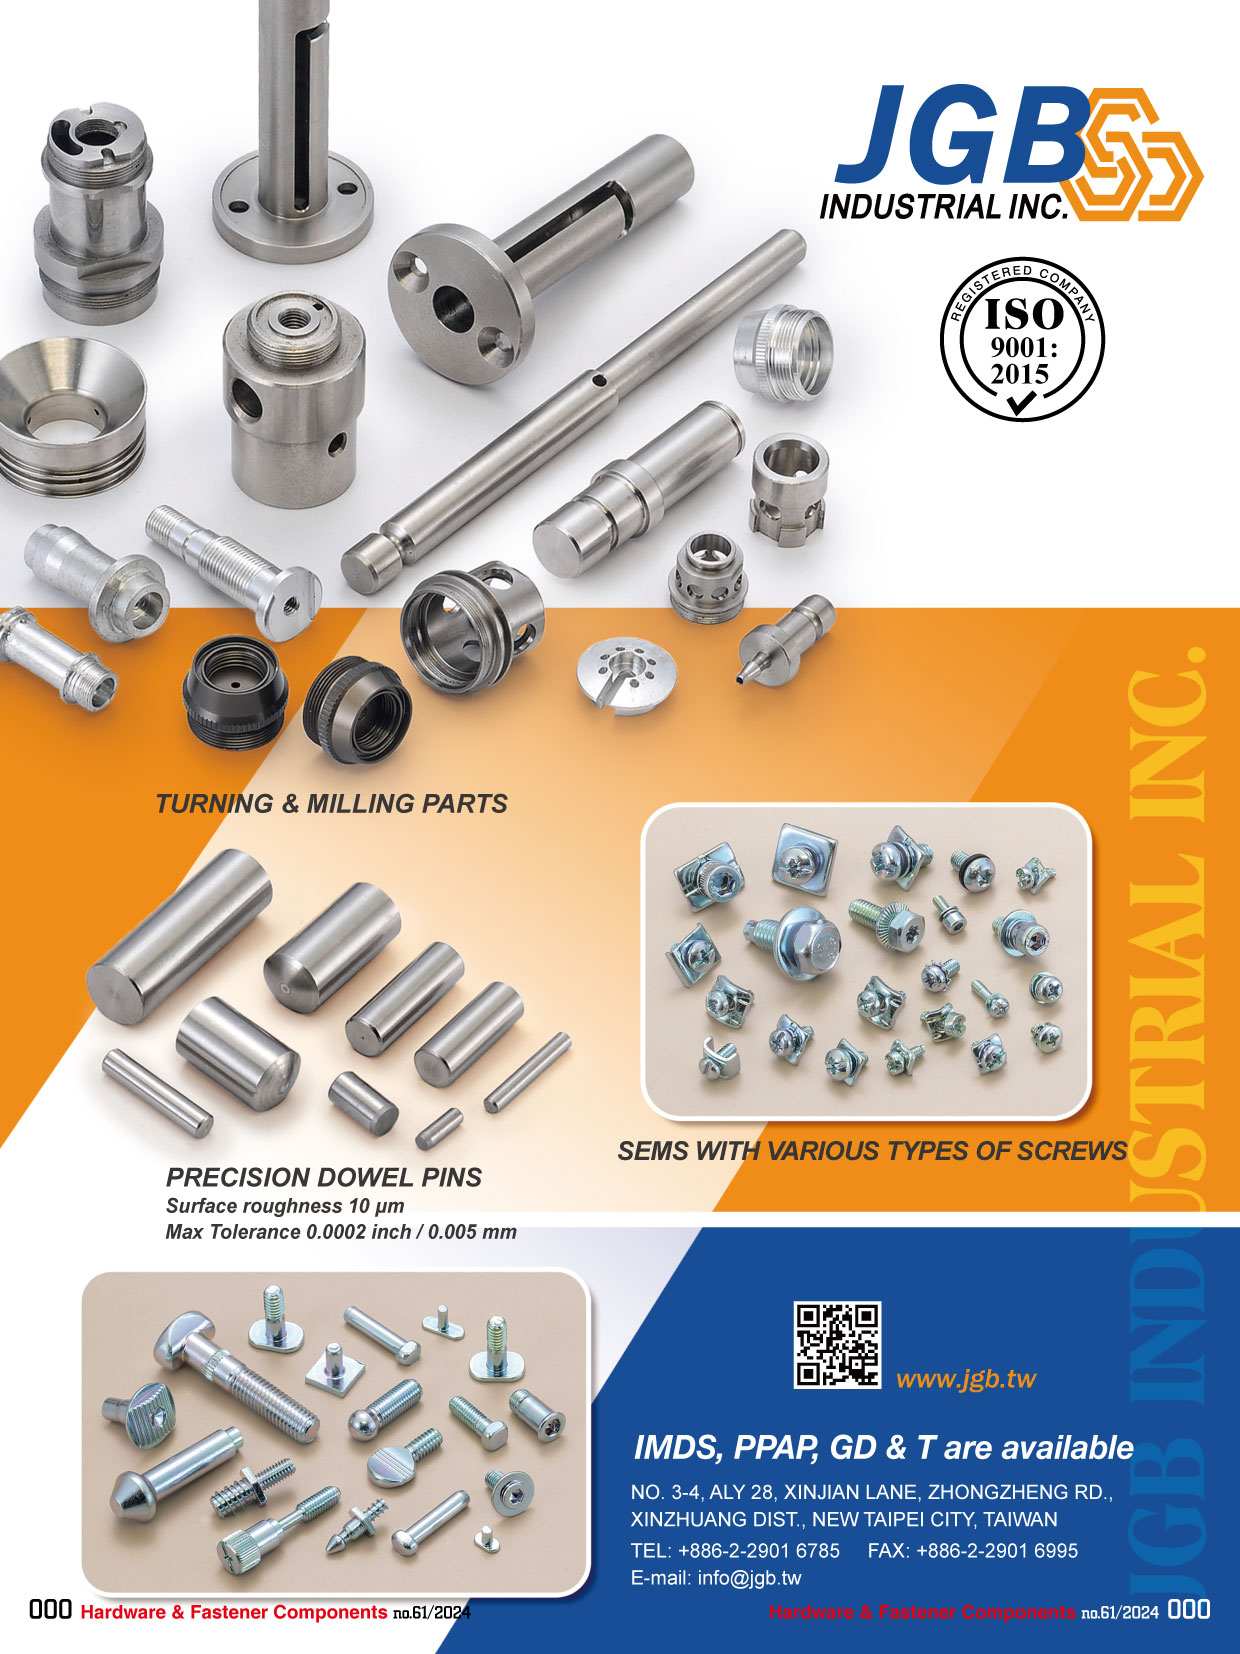 JGB INDUSTRIAL INC. , Turning&Milling Parts,Precision Dowel Pins,Sems with various types of screws